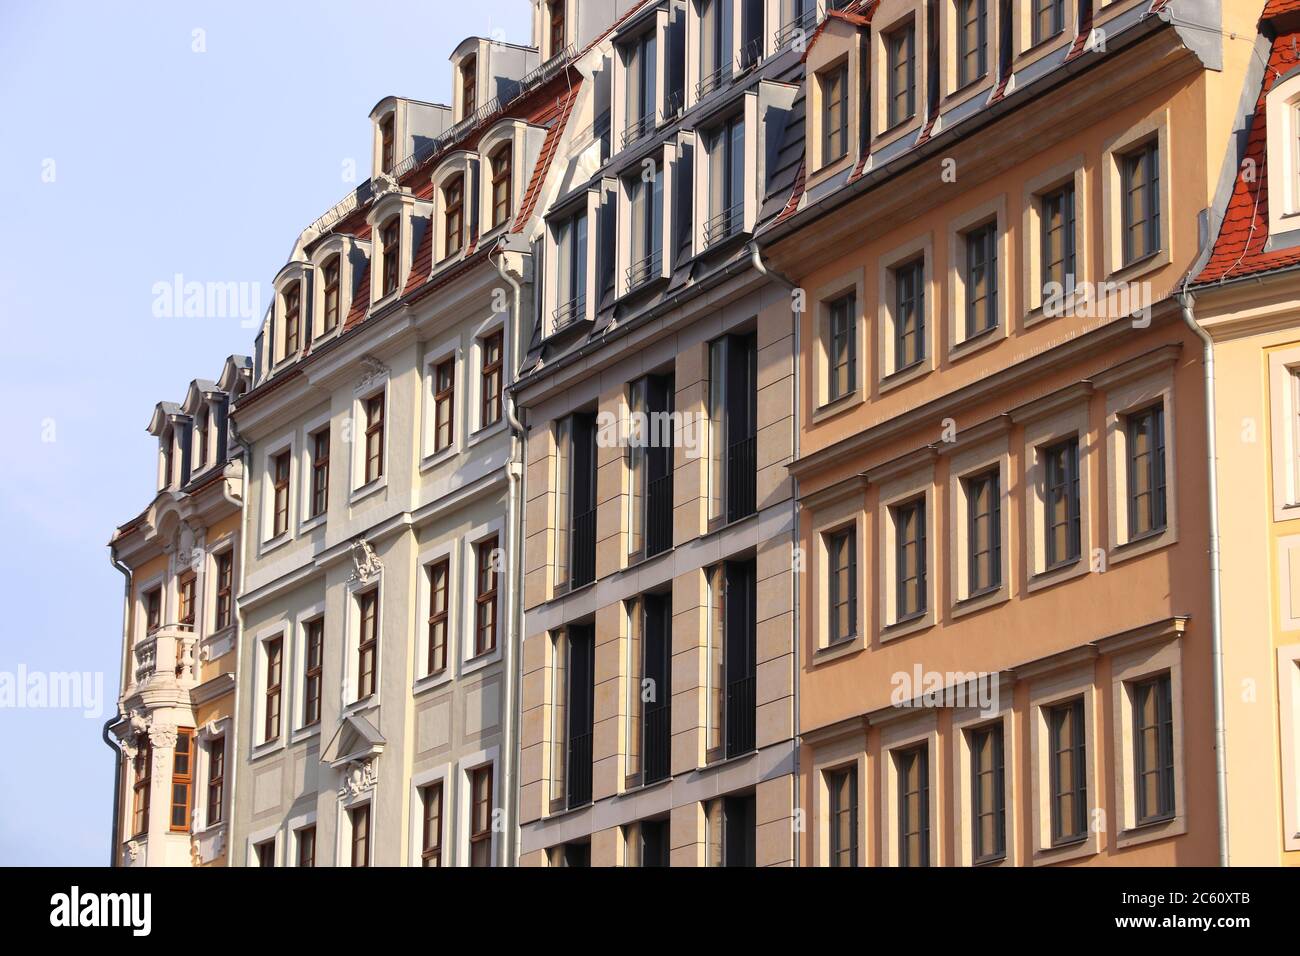 Dresden city in Germany (State of Sachsen). Old Town (Altstadt) colorful architecture at Neumarkt square. Stock Photo